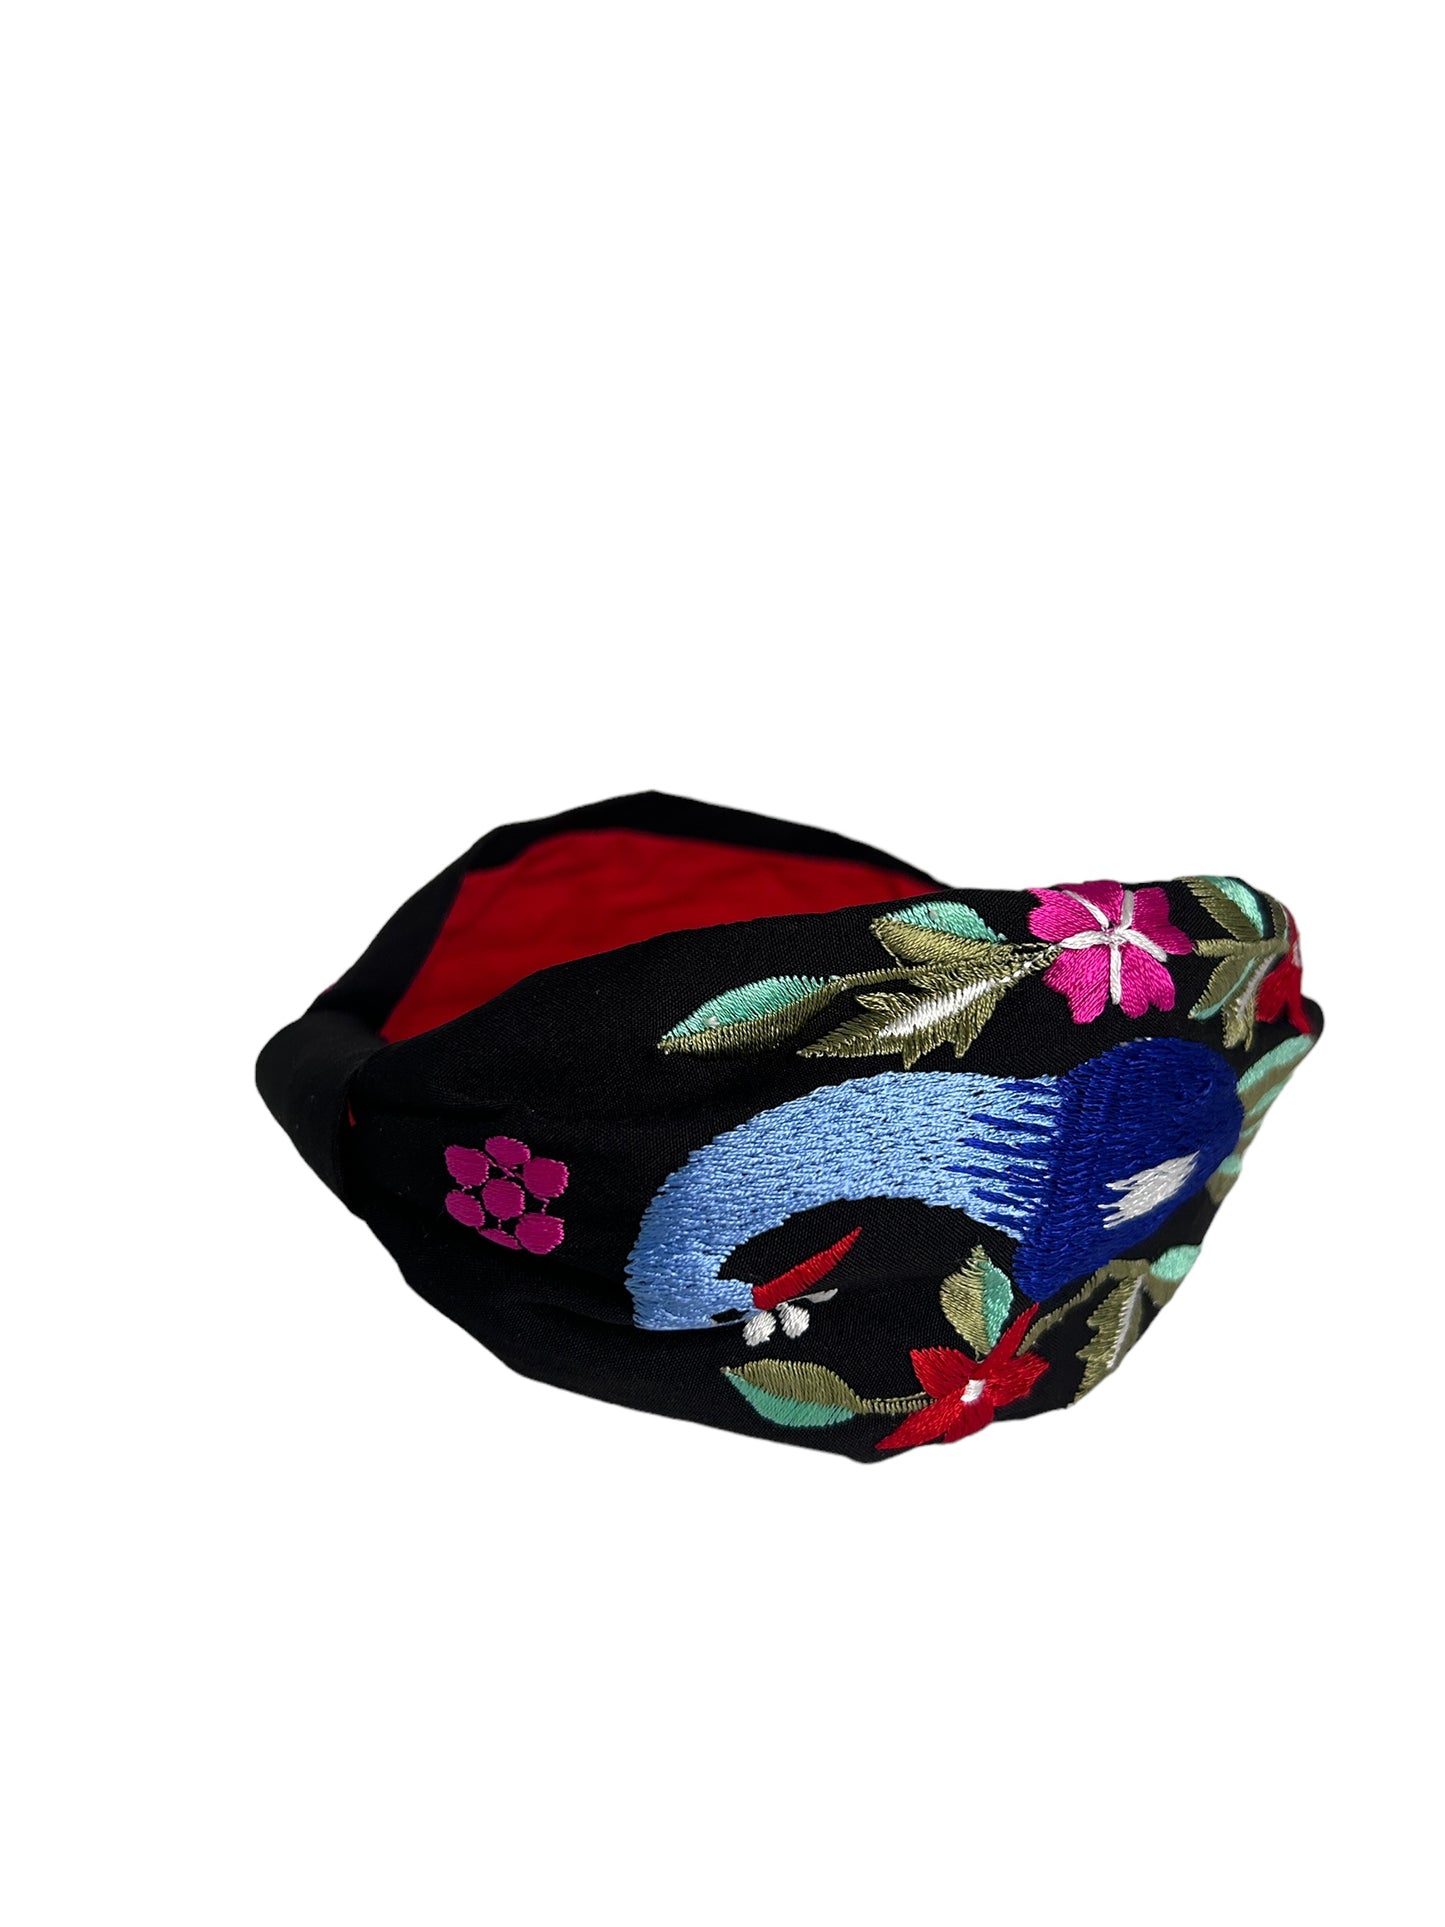 Headbands - Blue Peacock Embroidered